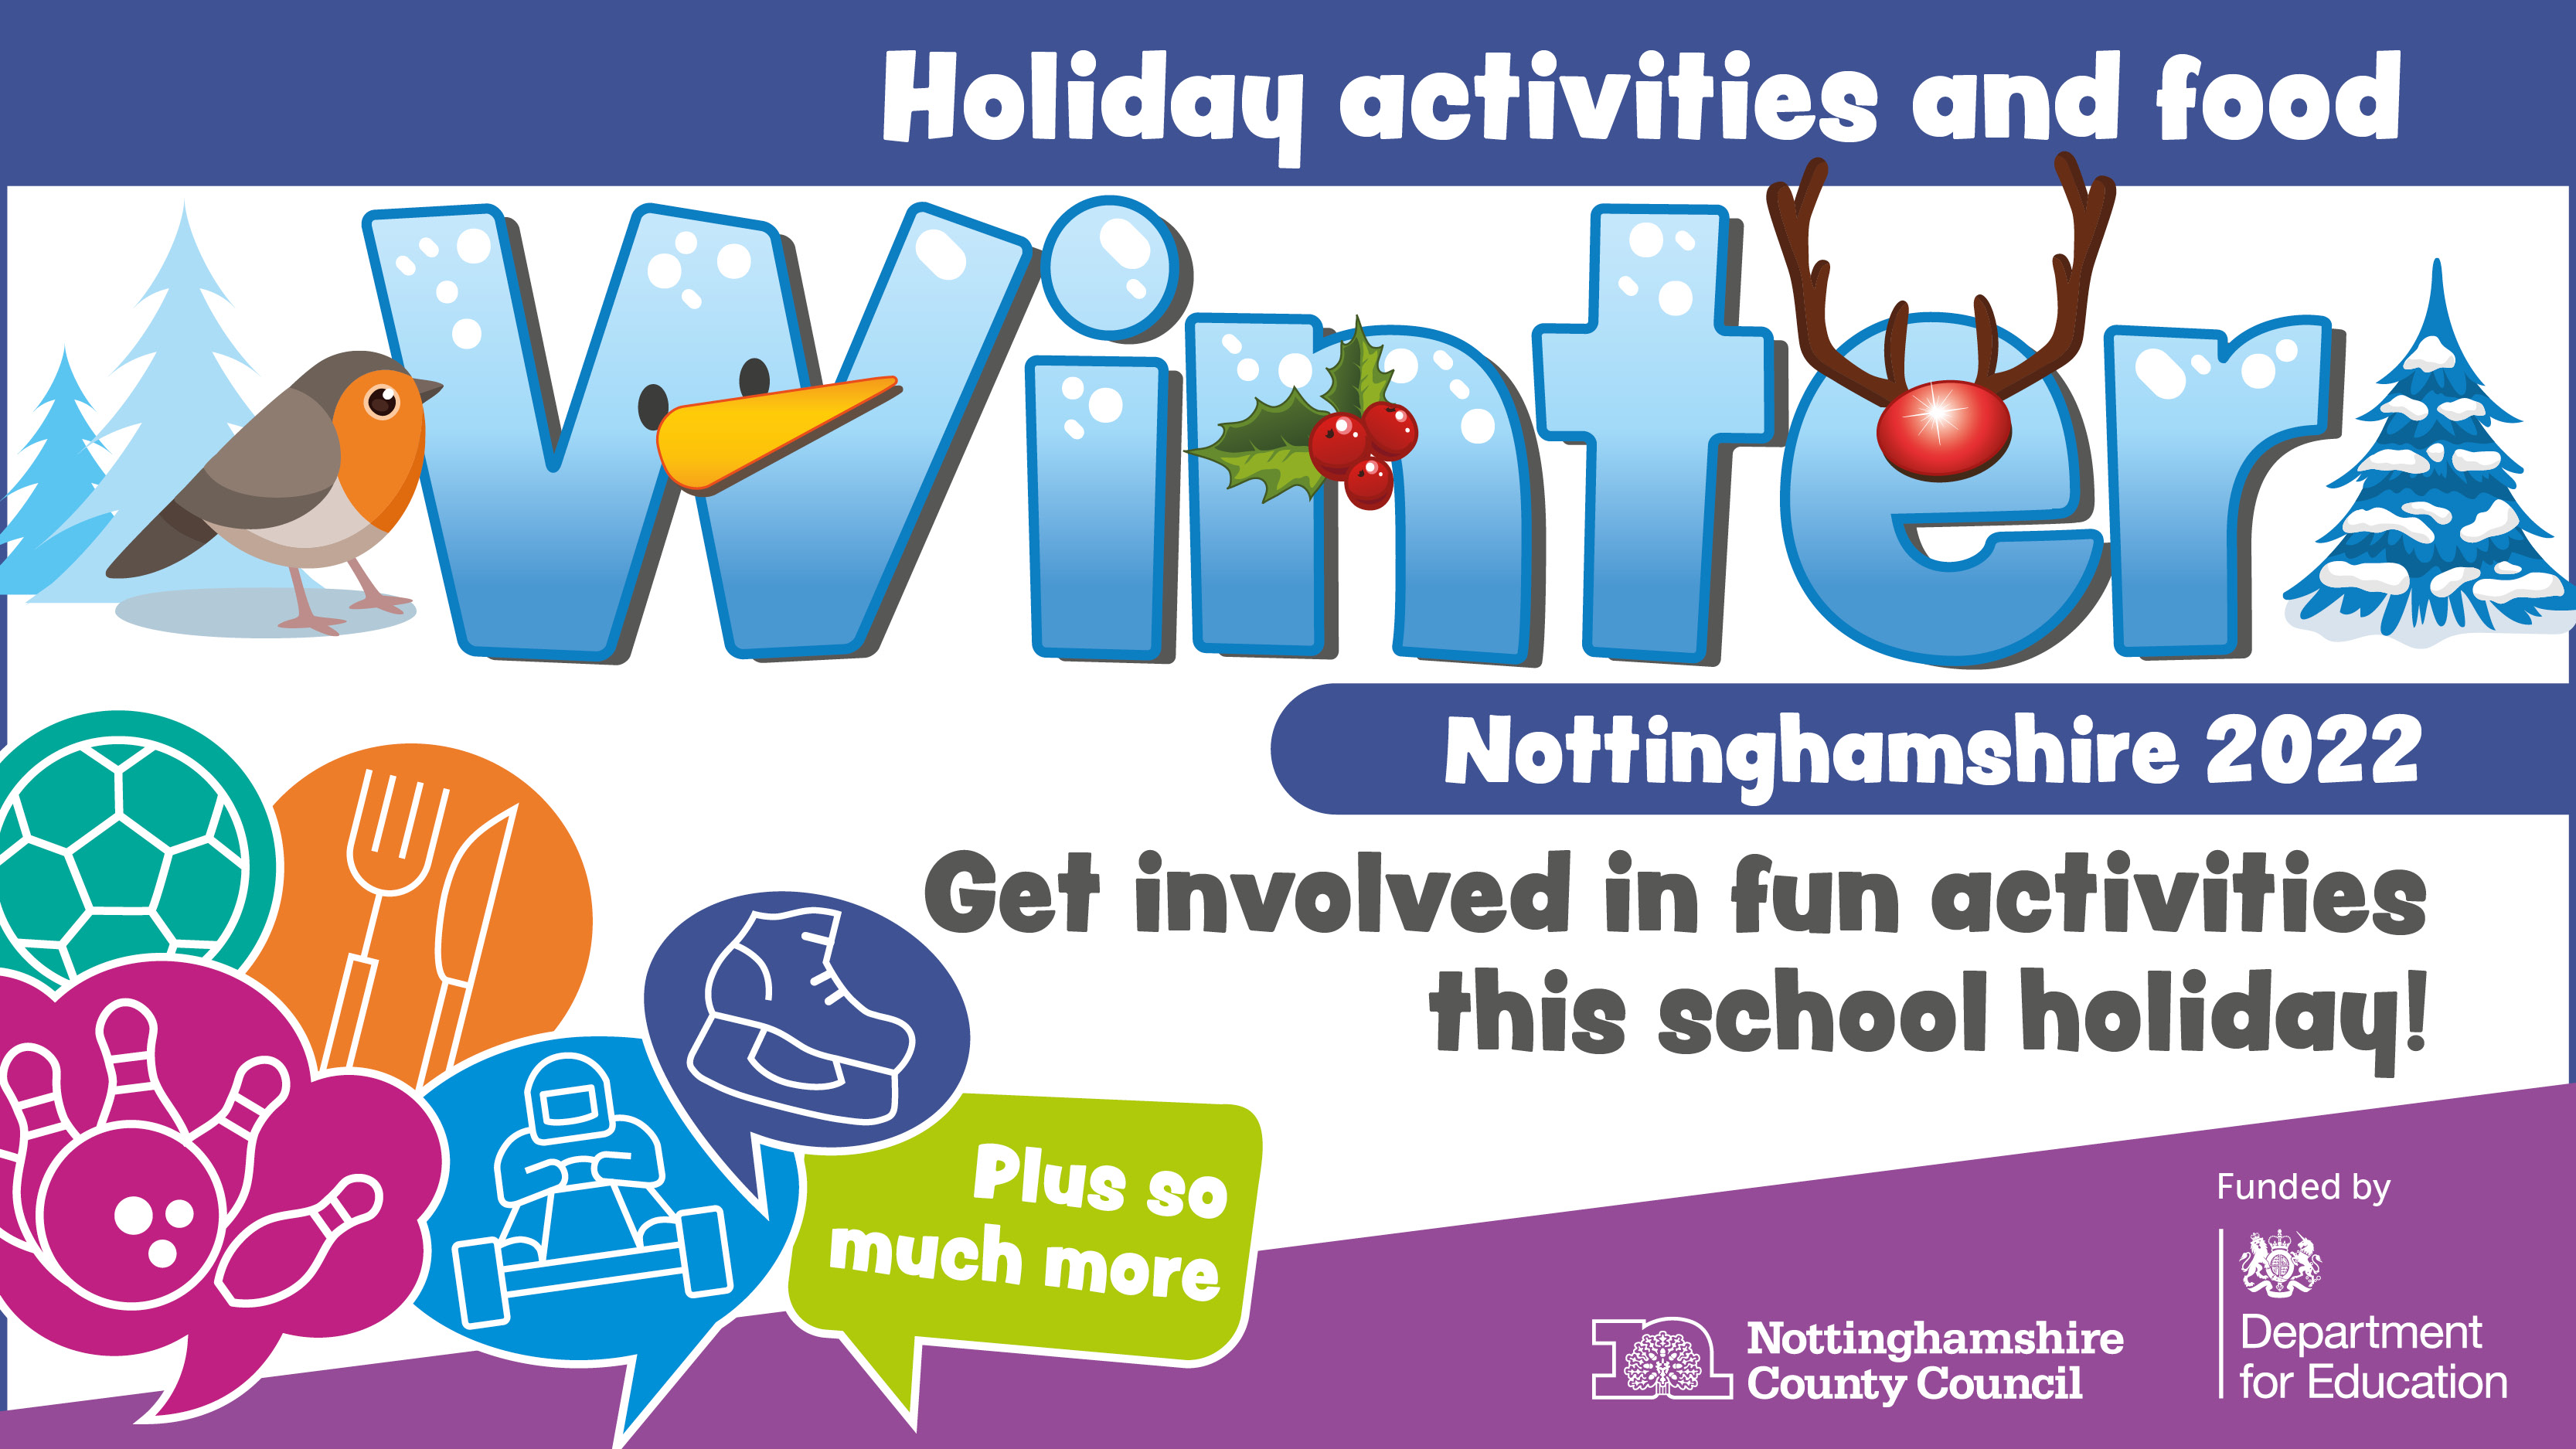 An illustrated graphic with the word ‘winter’ in large bold text and winter themed illustrations around it including a robin, holly and a Christmas tree. Other text says: Holiday activities and food, Nottinghamshire 2022. Get involved in fun activities this school holiday. Logos include Nottinghamshire County Council and Department for Education.